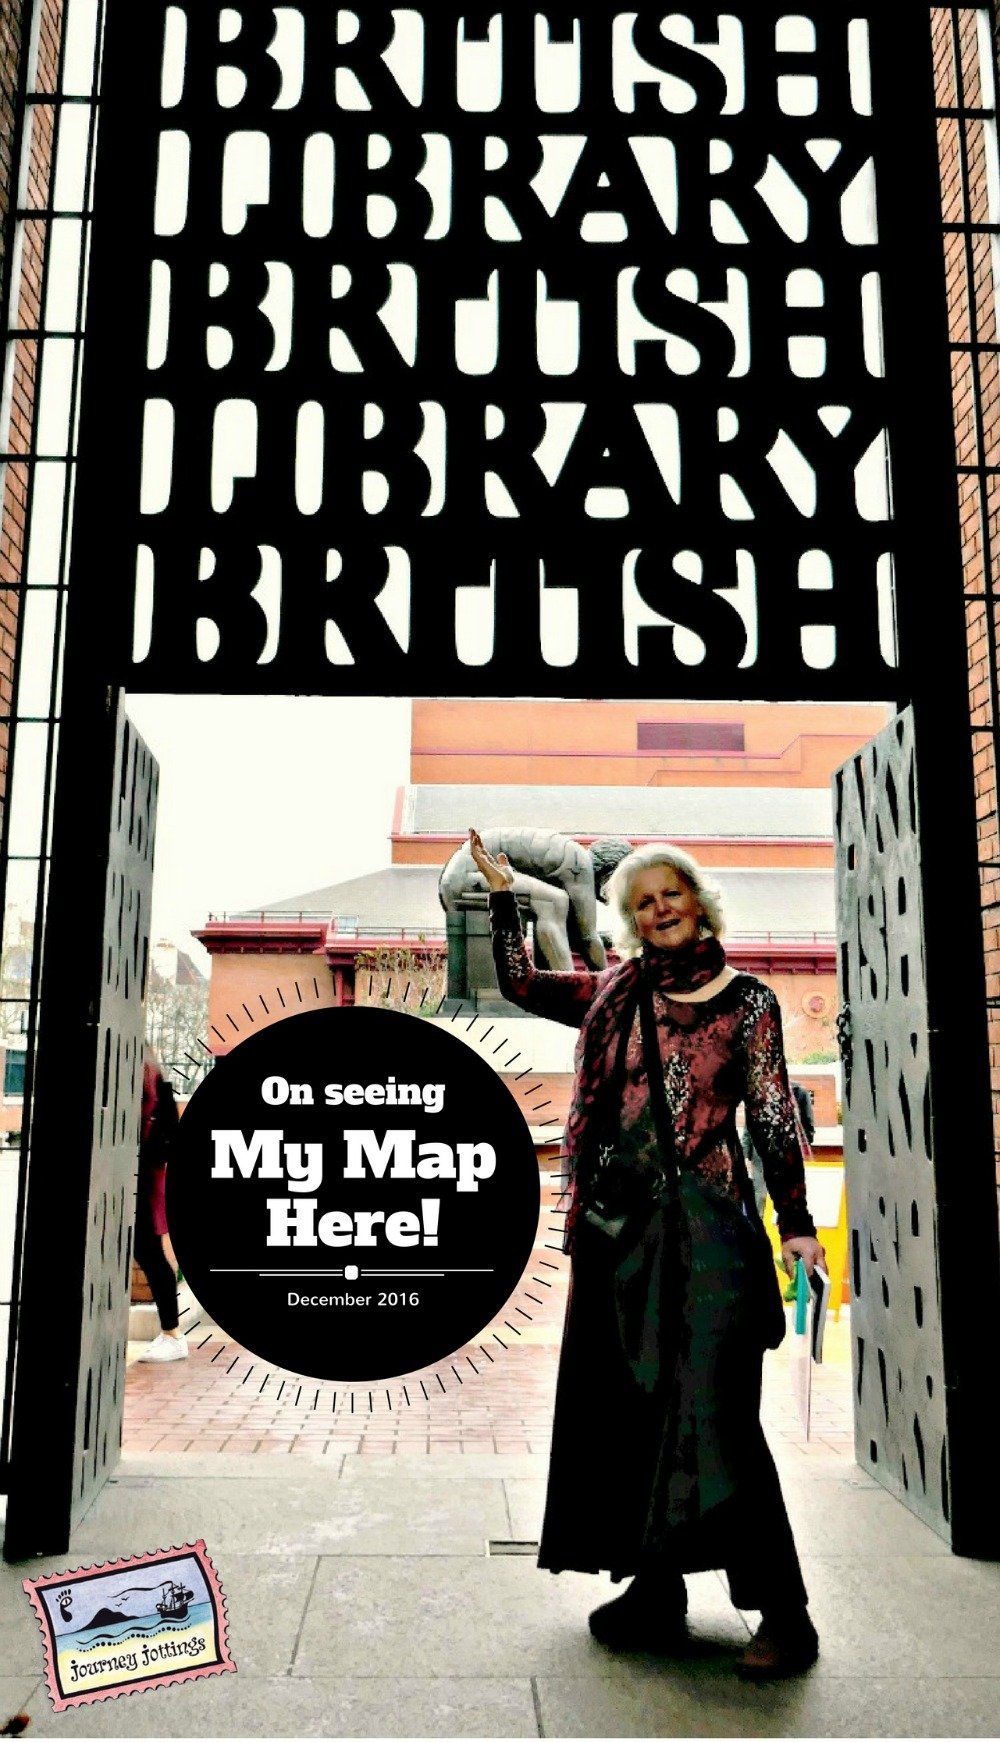 Standing outside the British Library having just seen my map there on exhibition